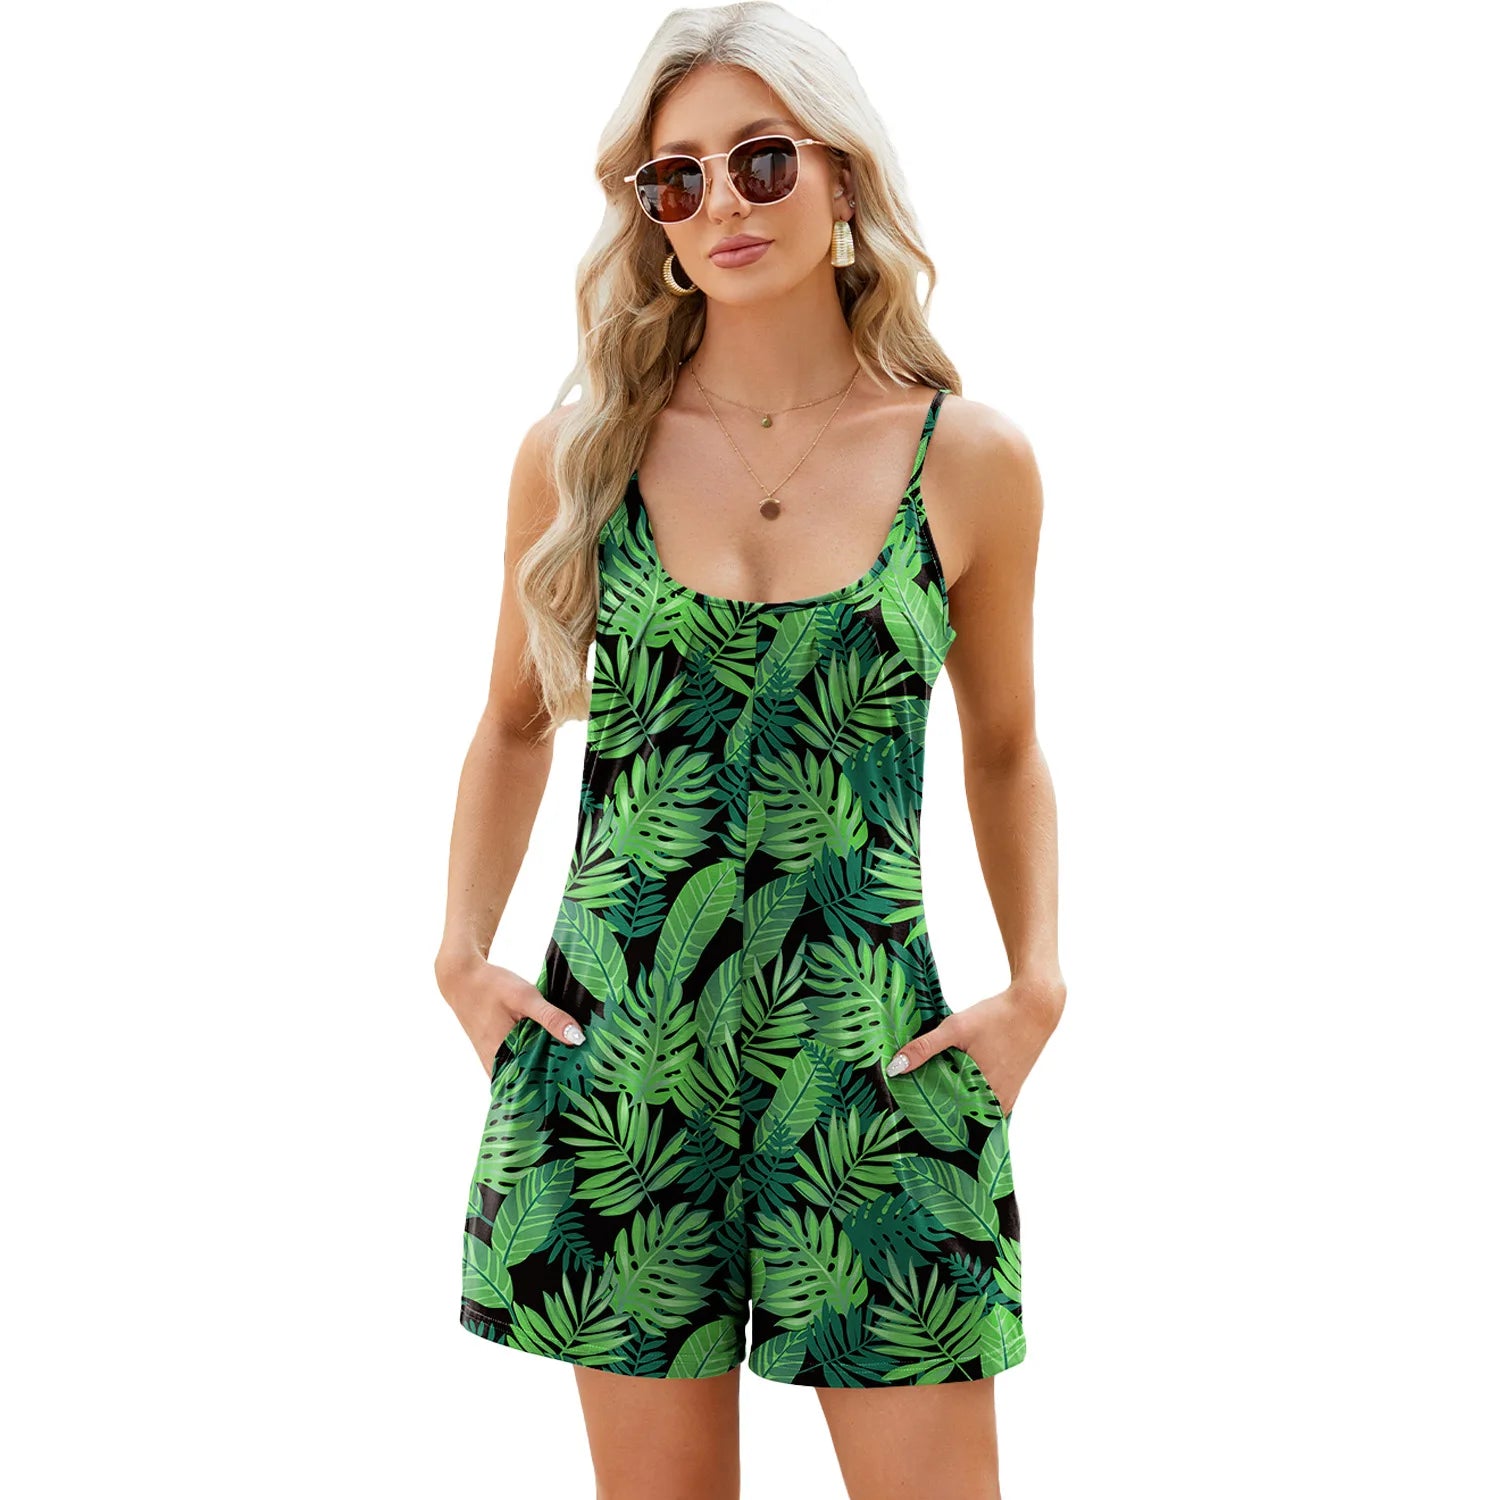 Rompers- Women's Solid Cotton Blend Romper - Short-Length Cami Playsuit- - Chuzko Women Clothing